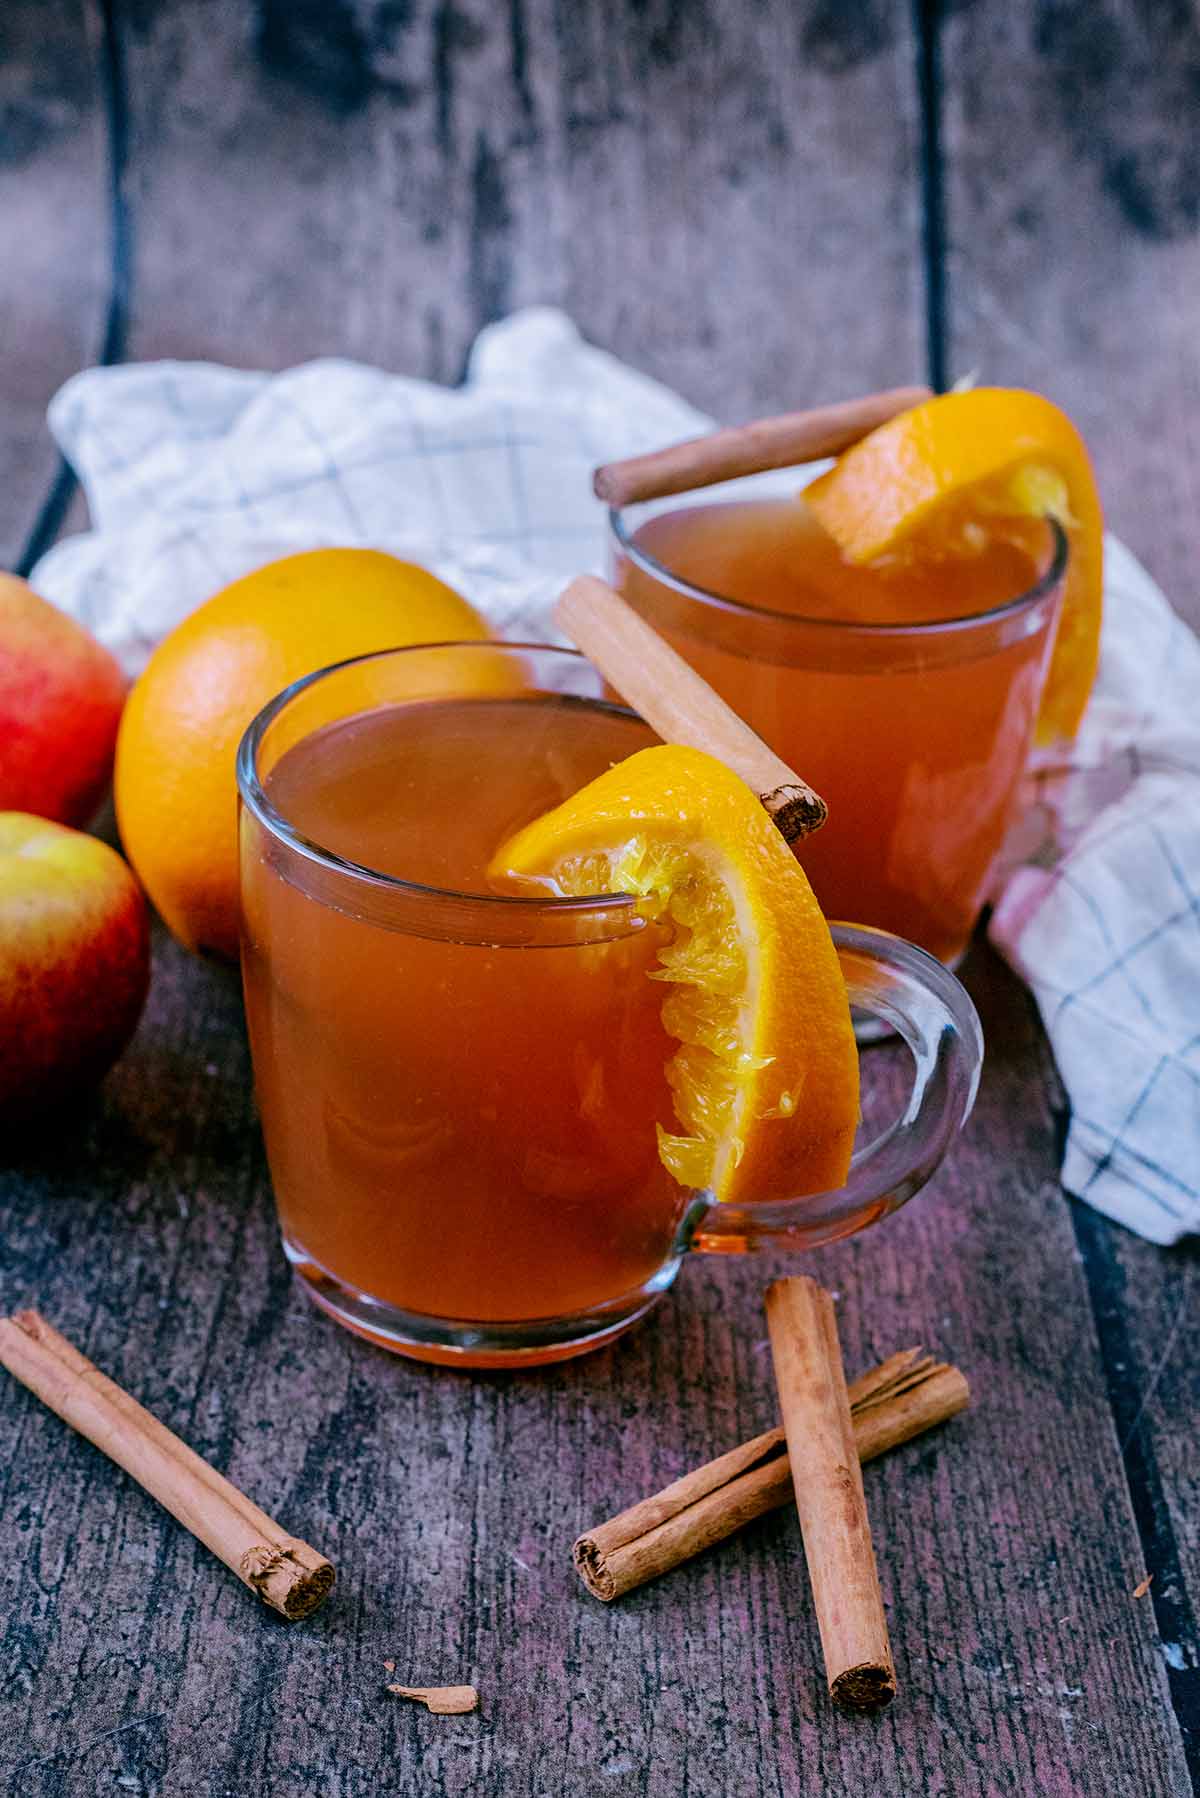 Two glasses of mulled cider next to some oranges and cinnamon sticks.